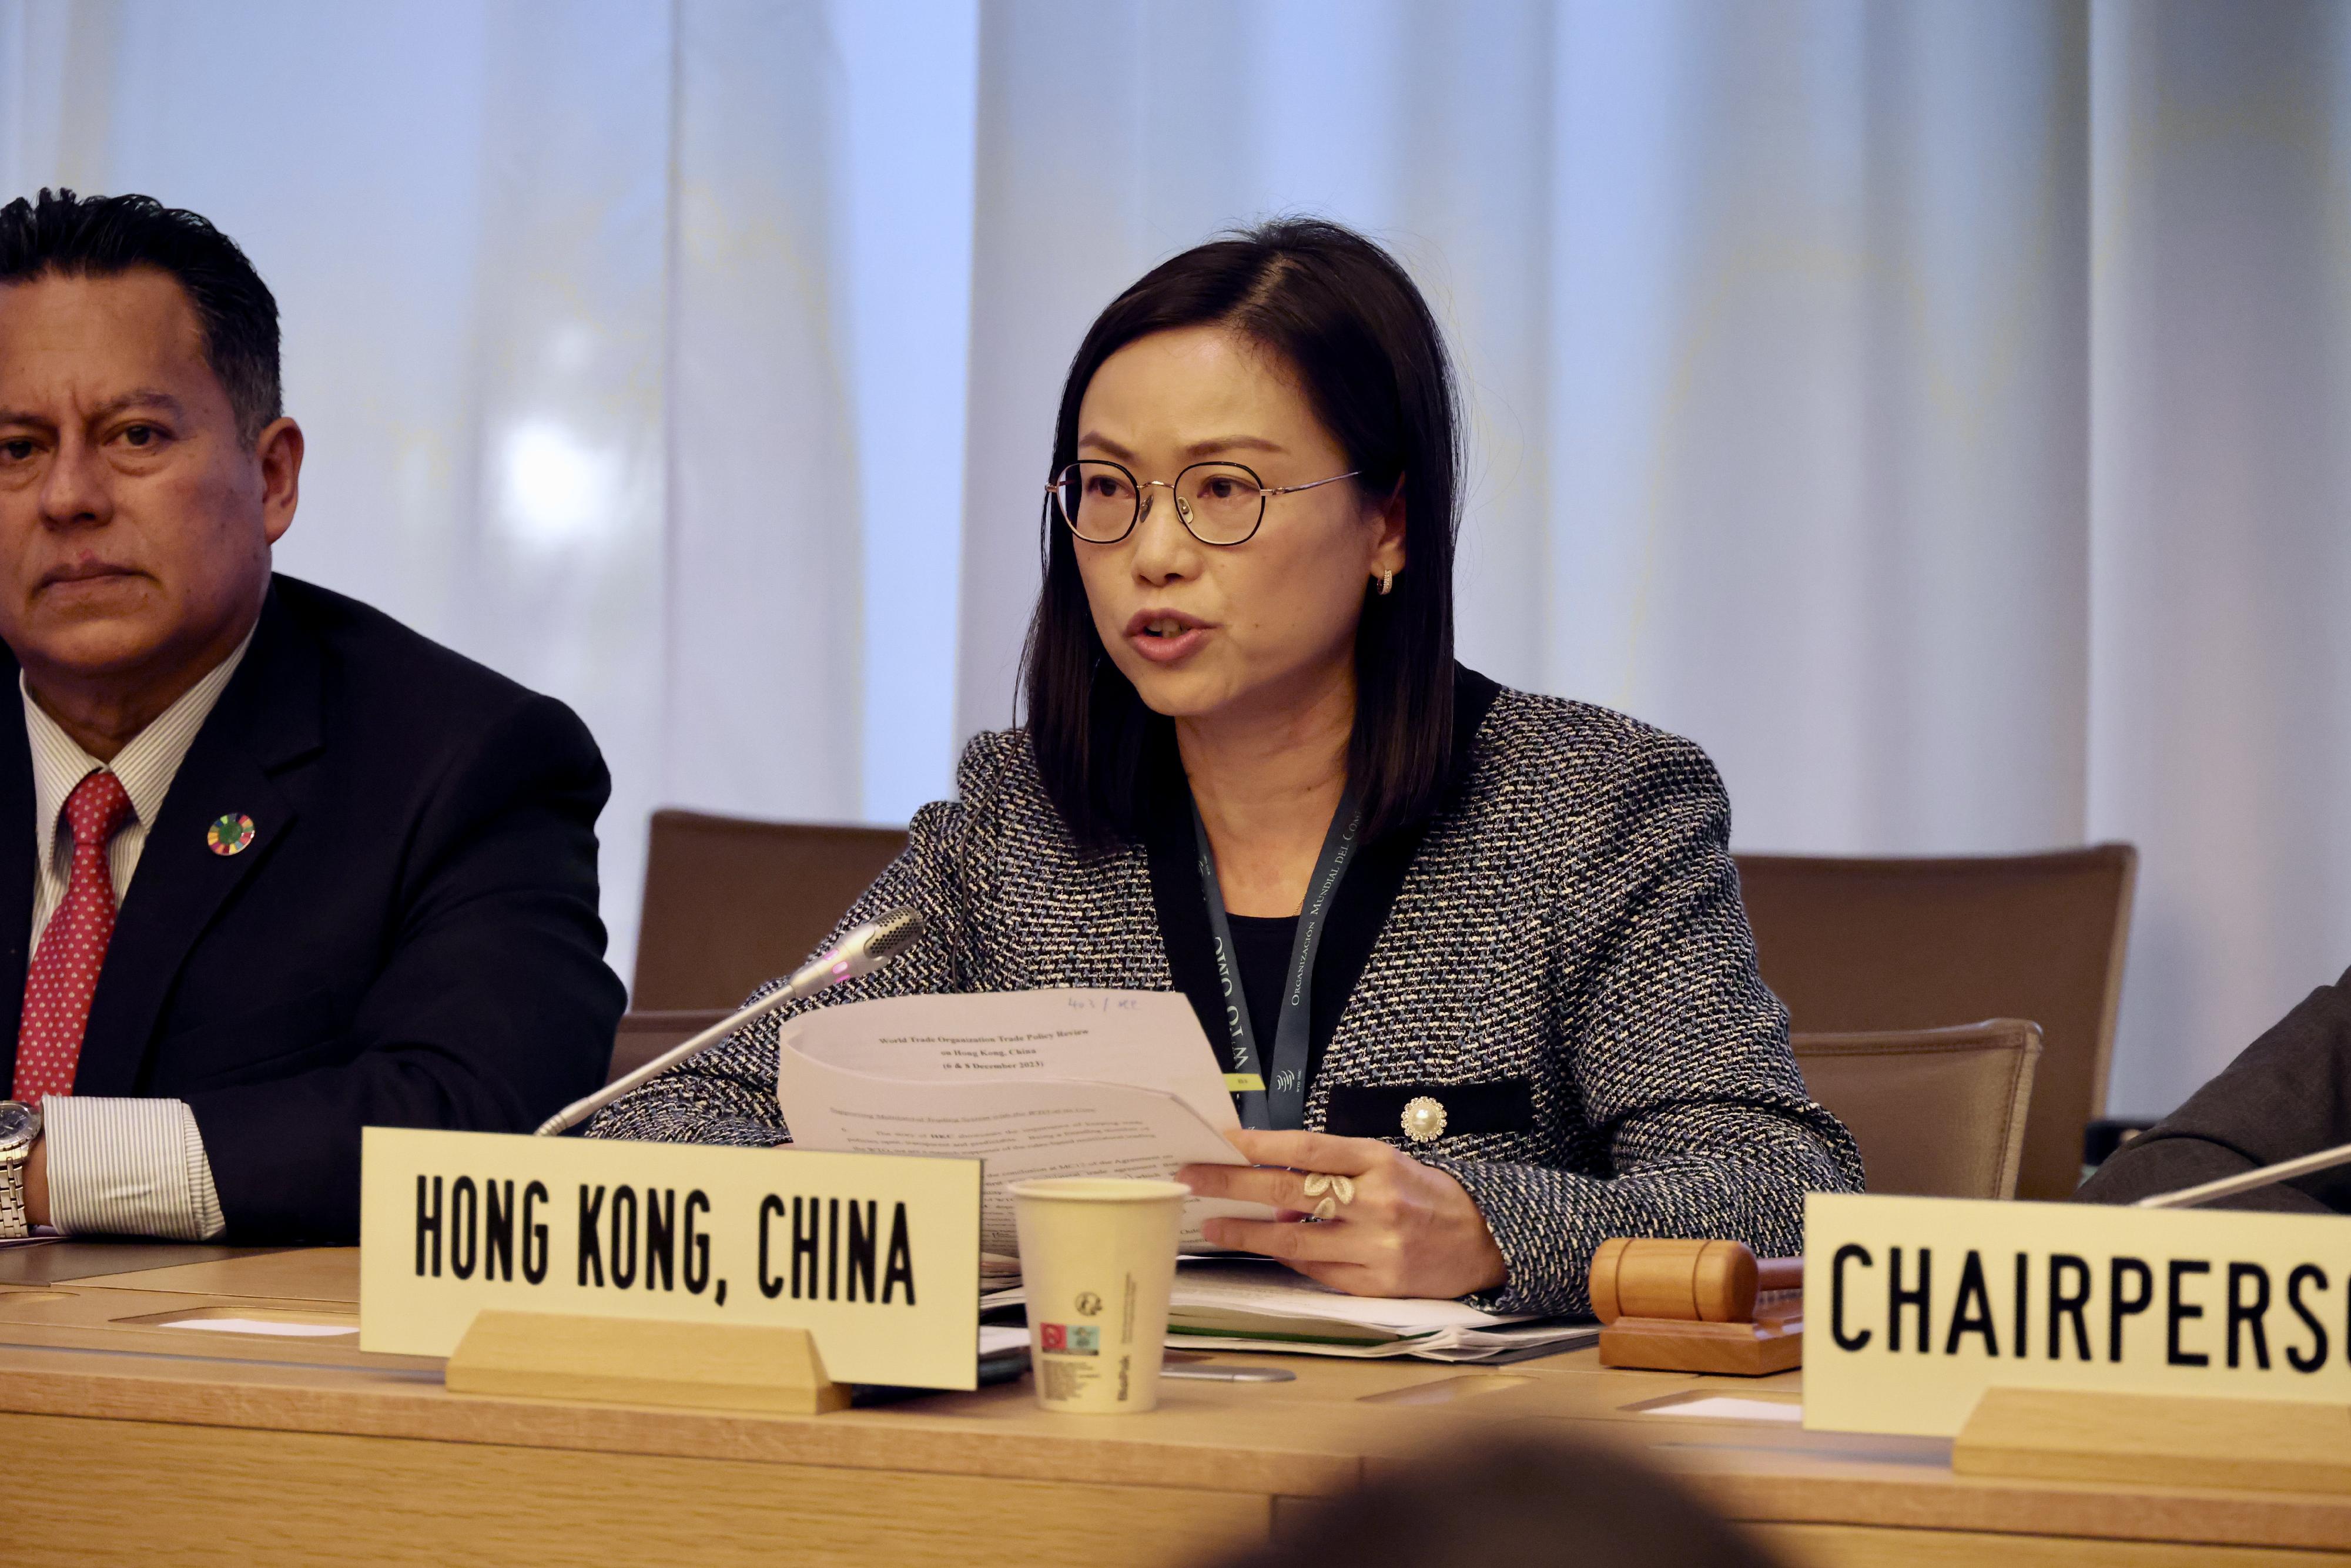 The Director-General of Trade and Industry, Ms Maggie Wong (right), delivered the opening statement at the World Trade Organization Trade Policy Review meeting of Hong Kong, China on December 6 (Geneva time)  in Geneva, Switzerland. (Source of photo: the World Trade Organization)